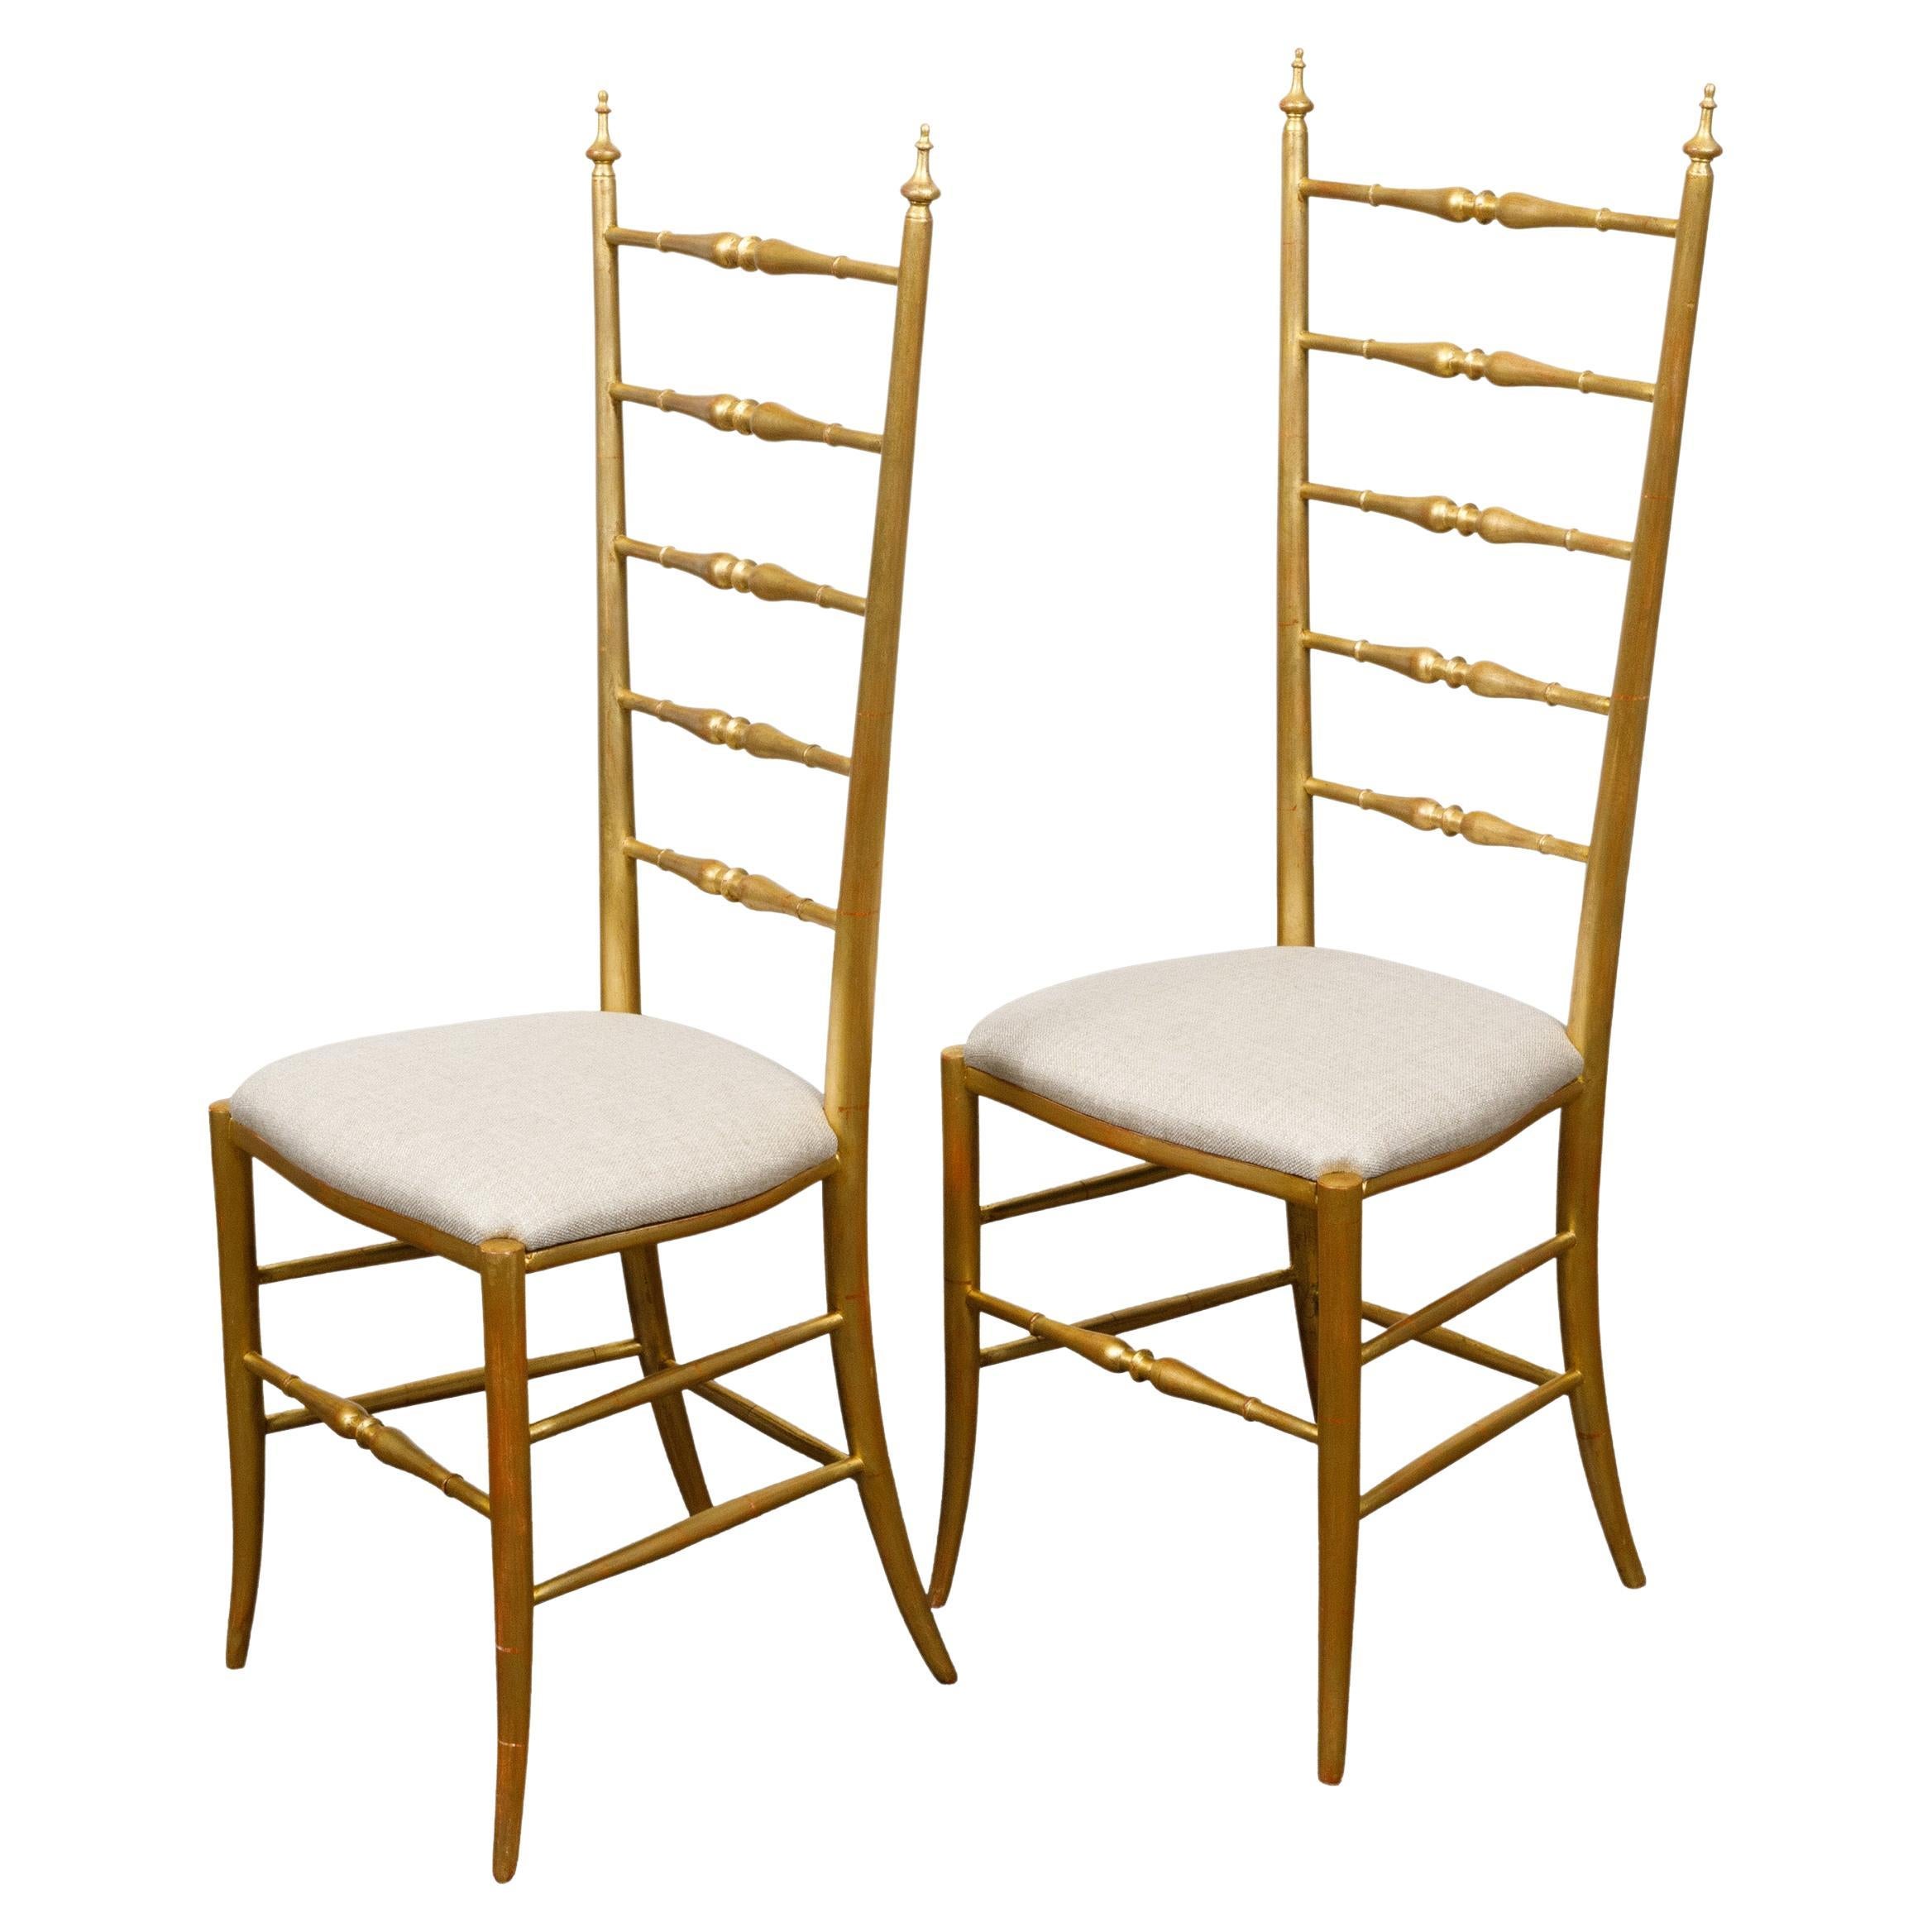 Pair of Midcentury Italian Gilt Wood High Back Side Chairs with Upholstery For Sale